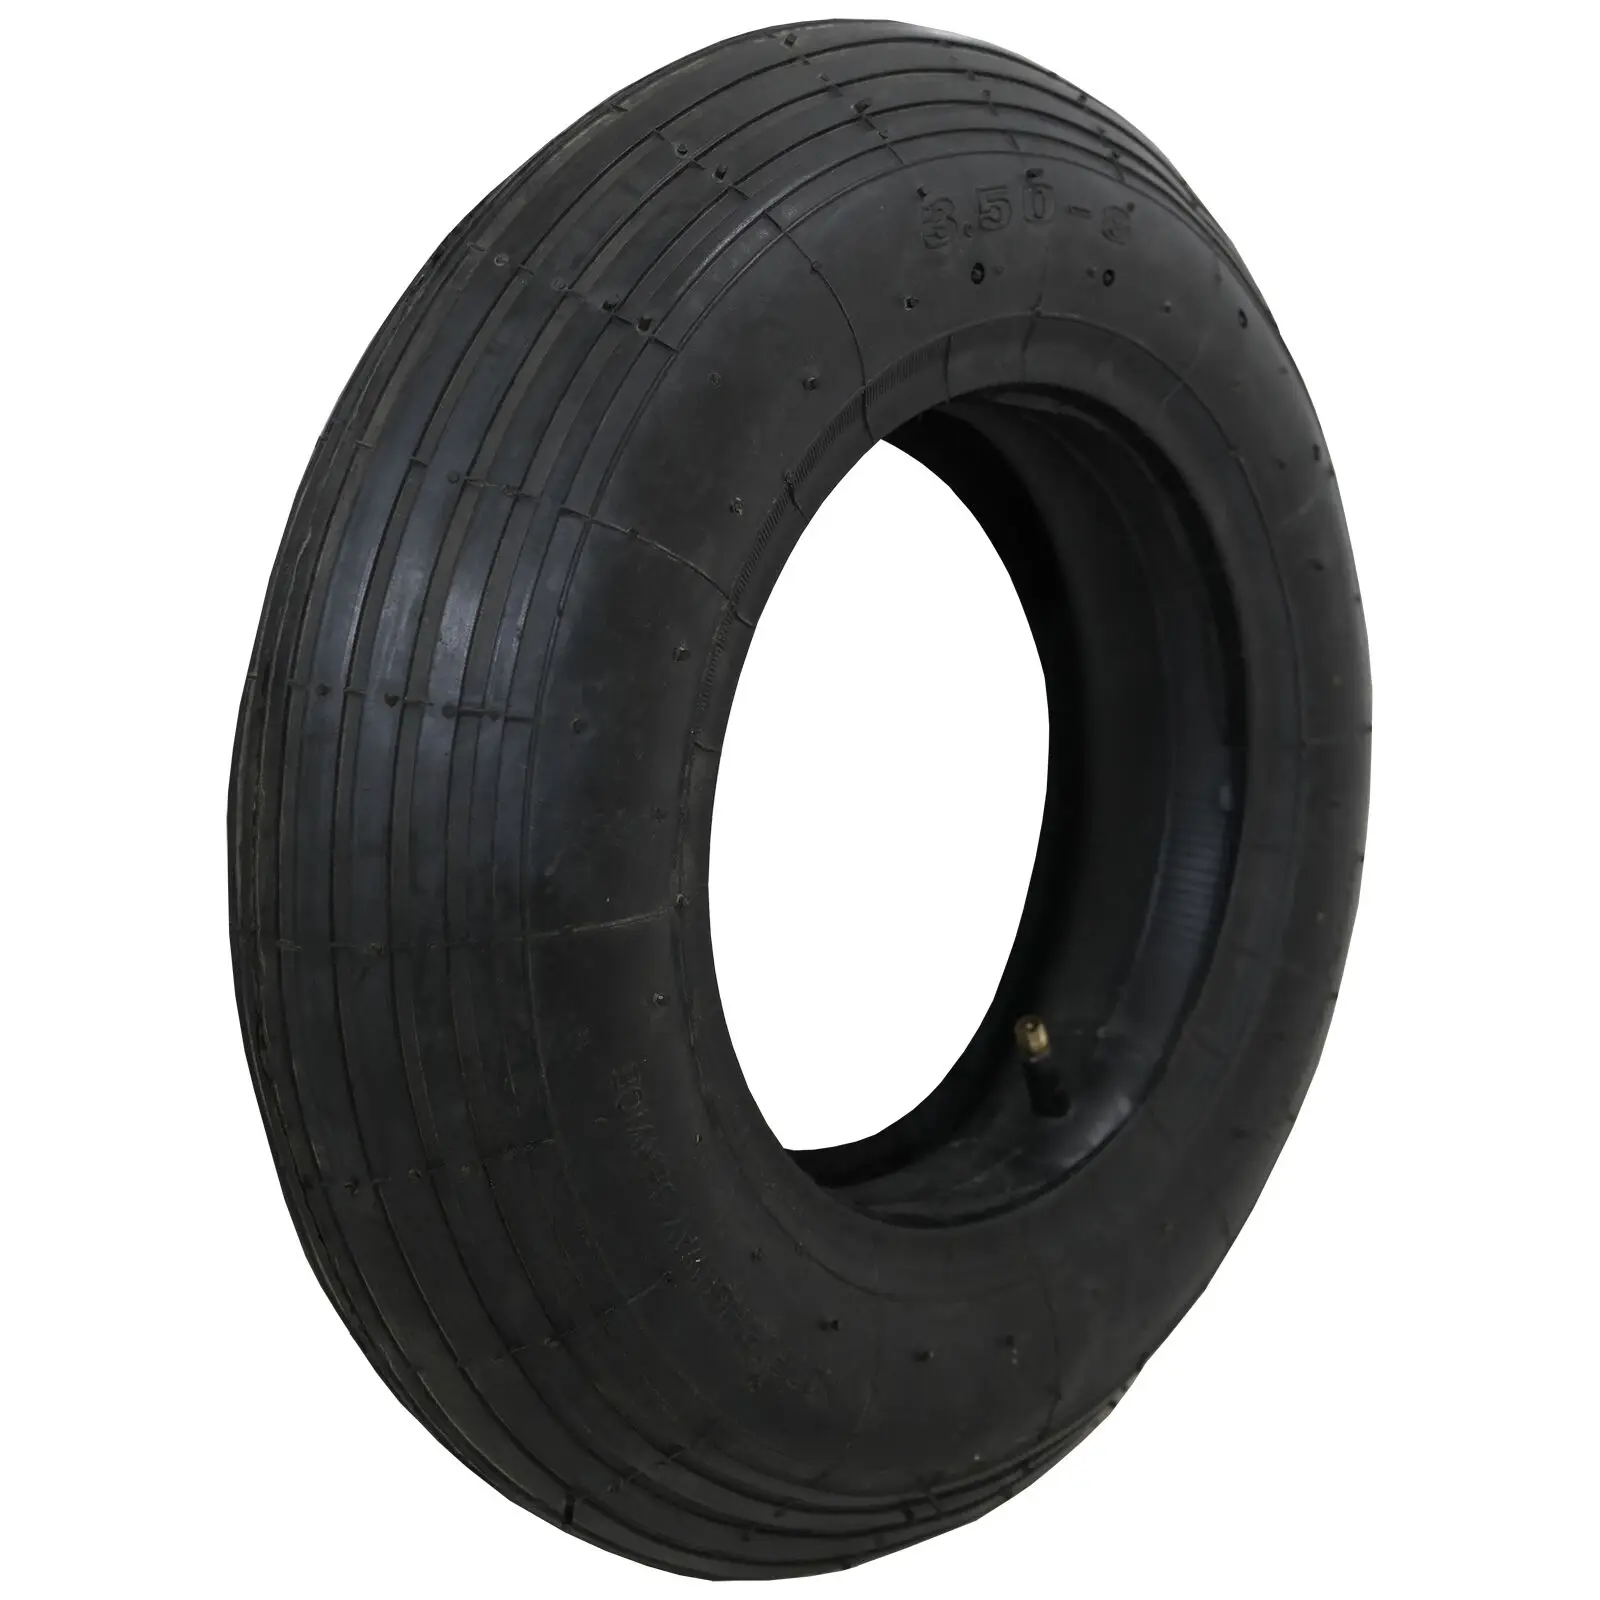 Replacement Wheel Spare Inner Tube Tyre For Heavy Duty Sack Truck ...